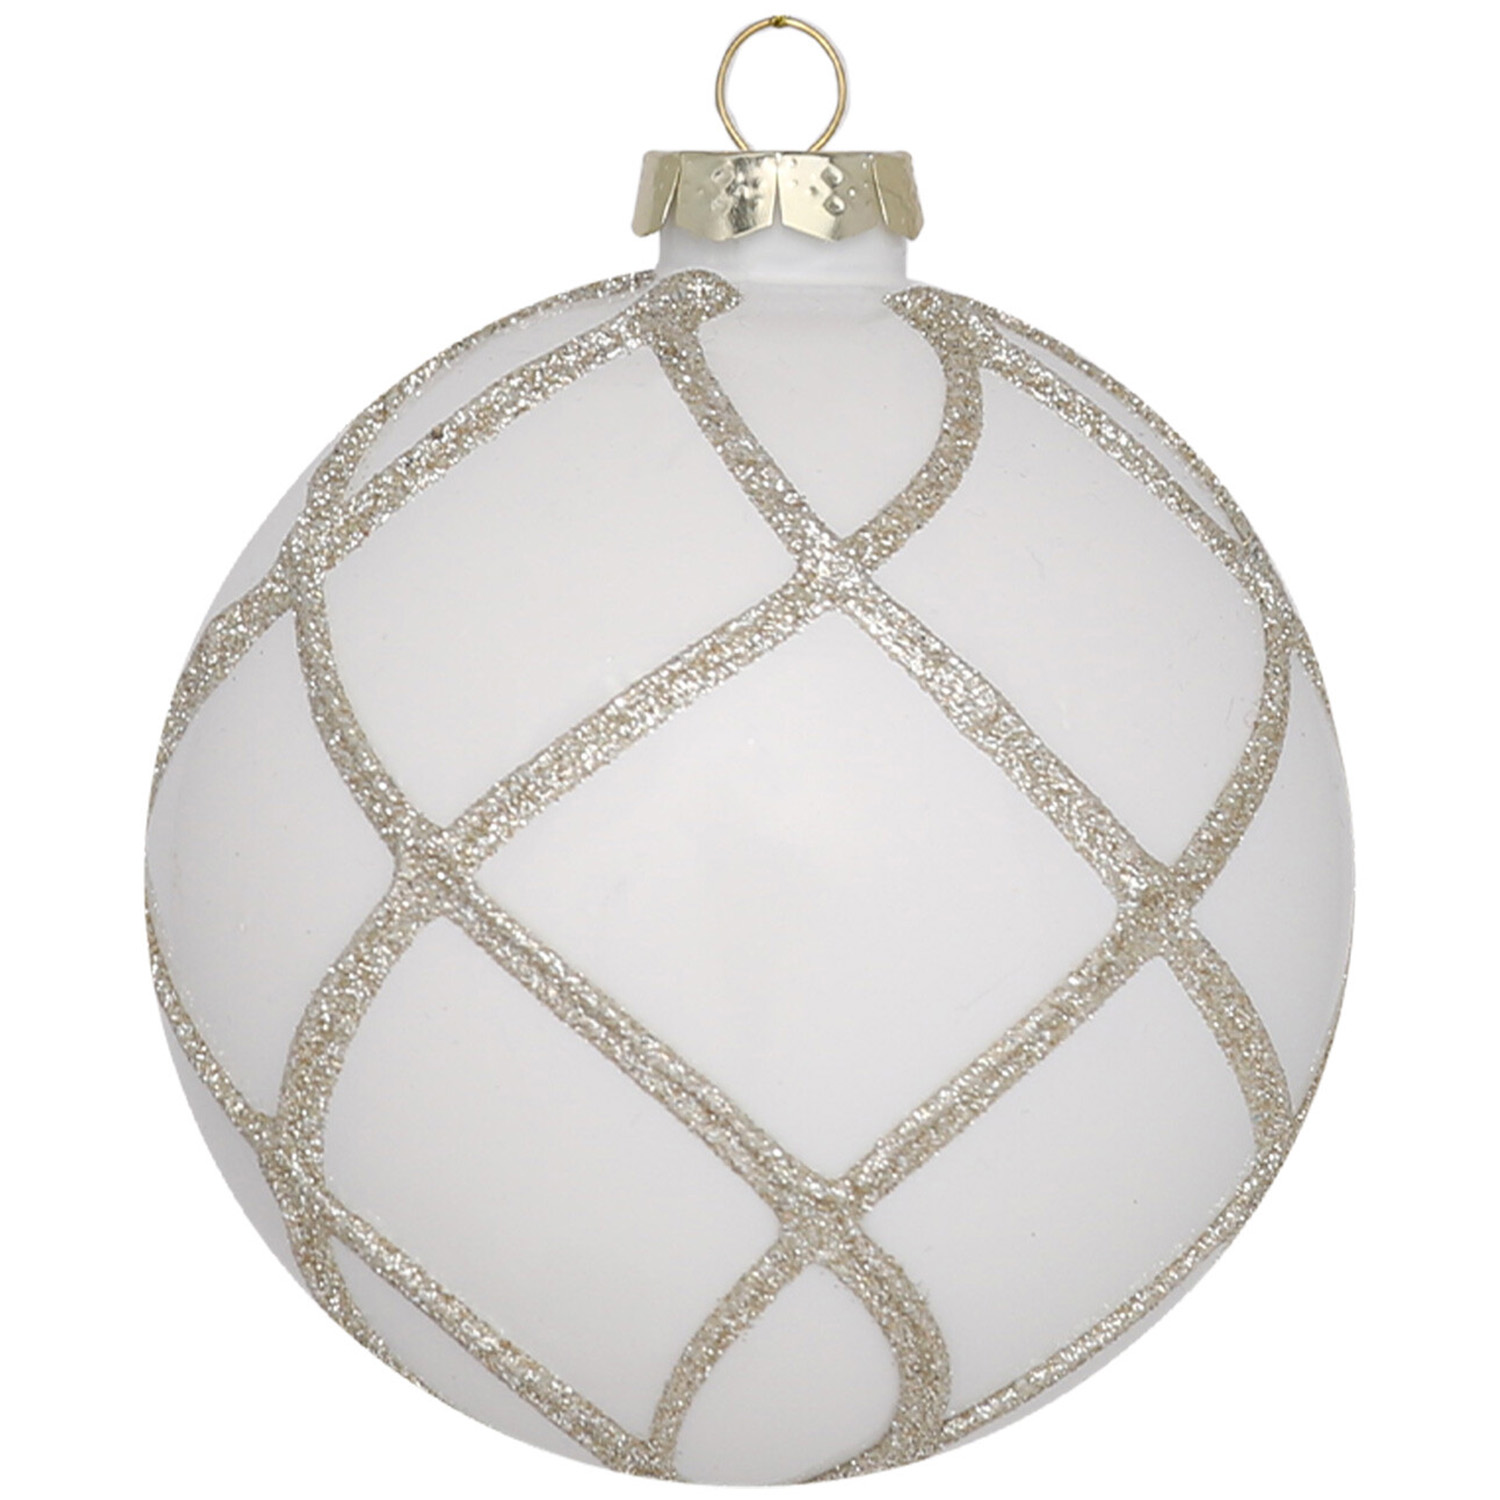 Decadent Bronze White Glitter Wrapped Bauble Image